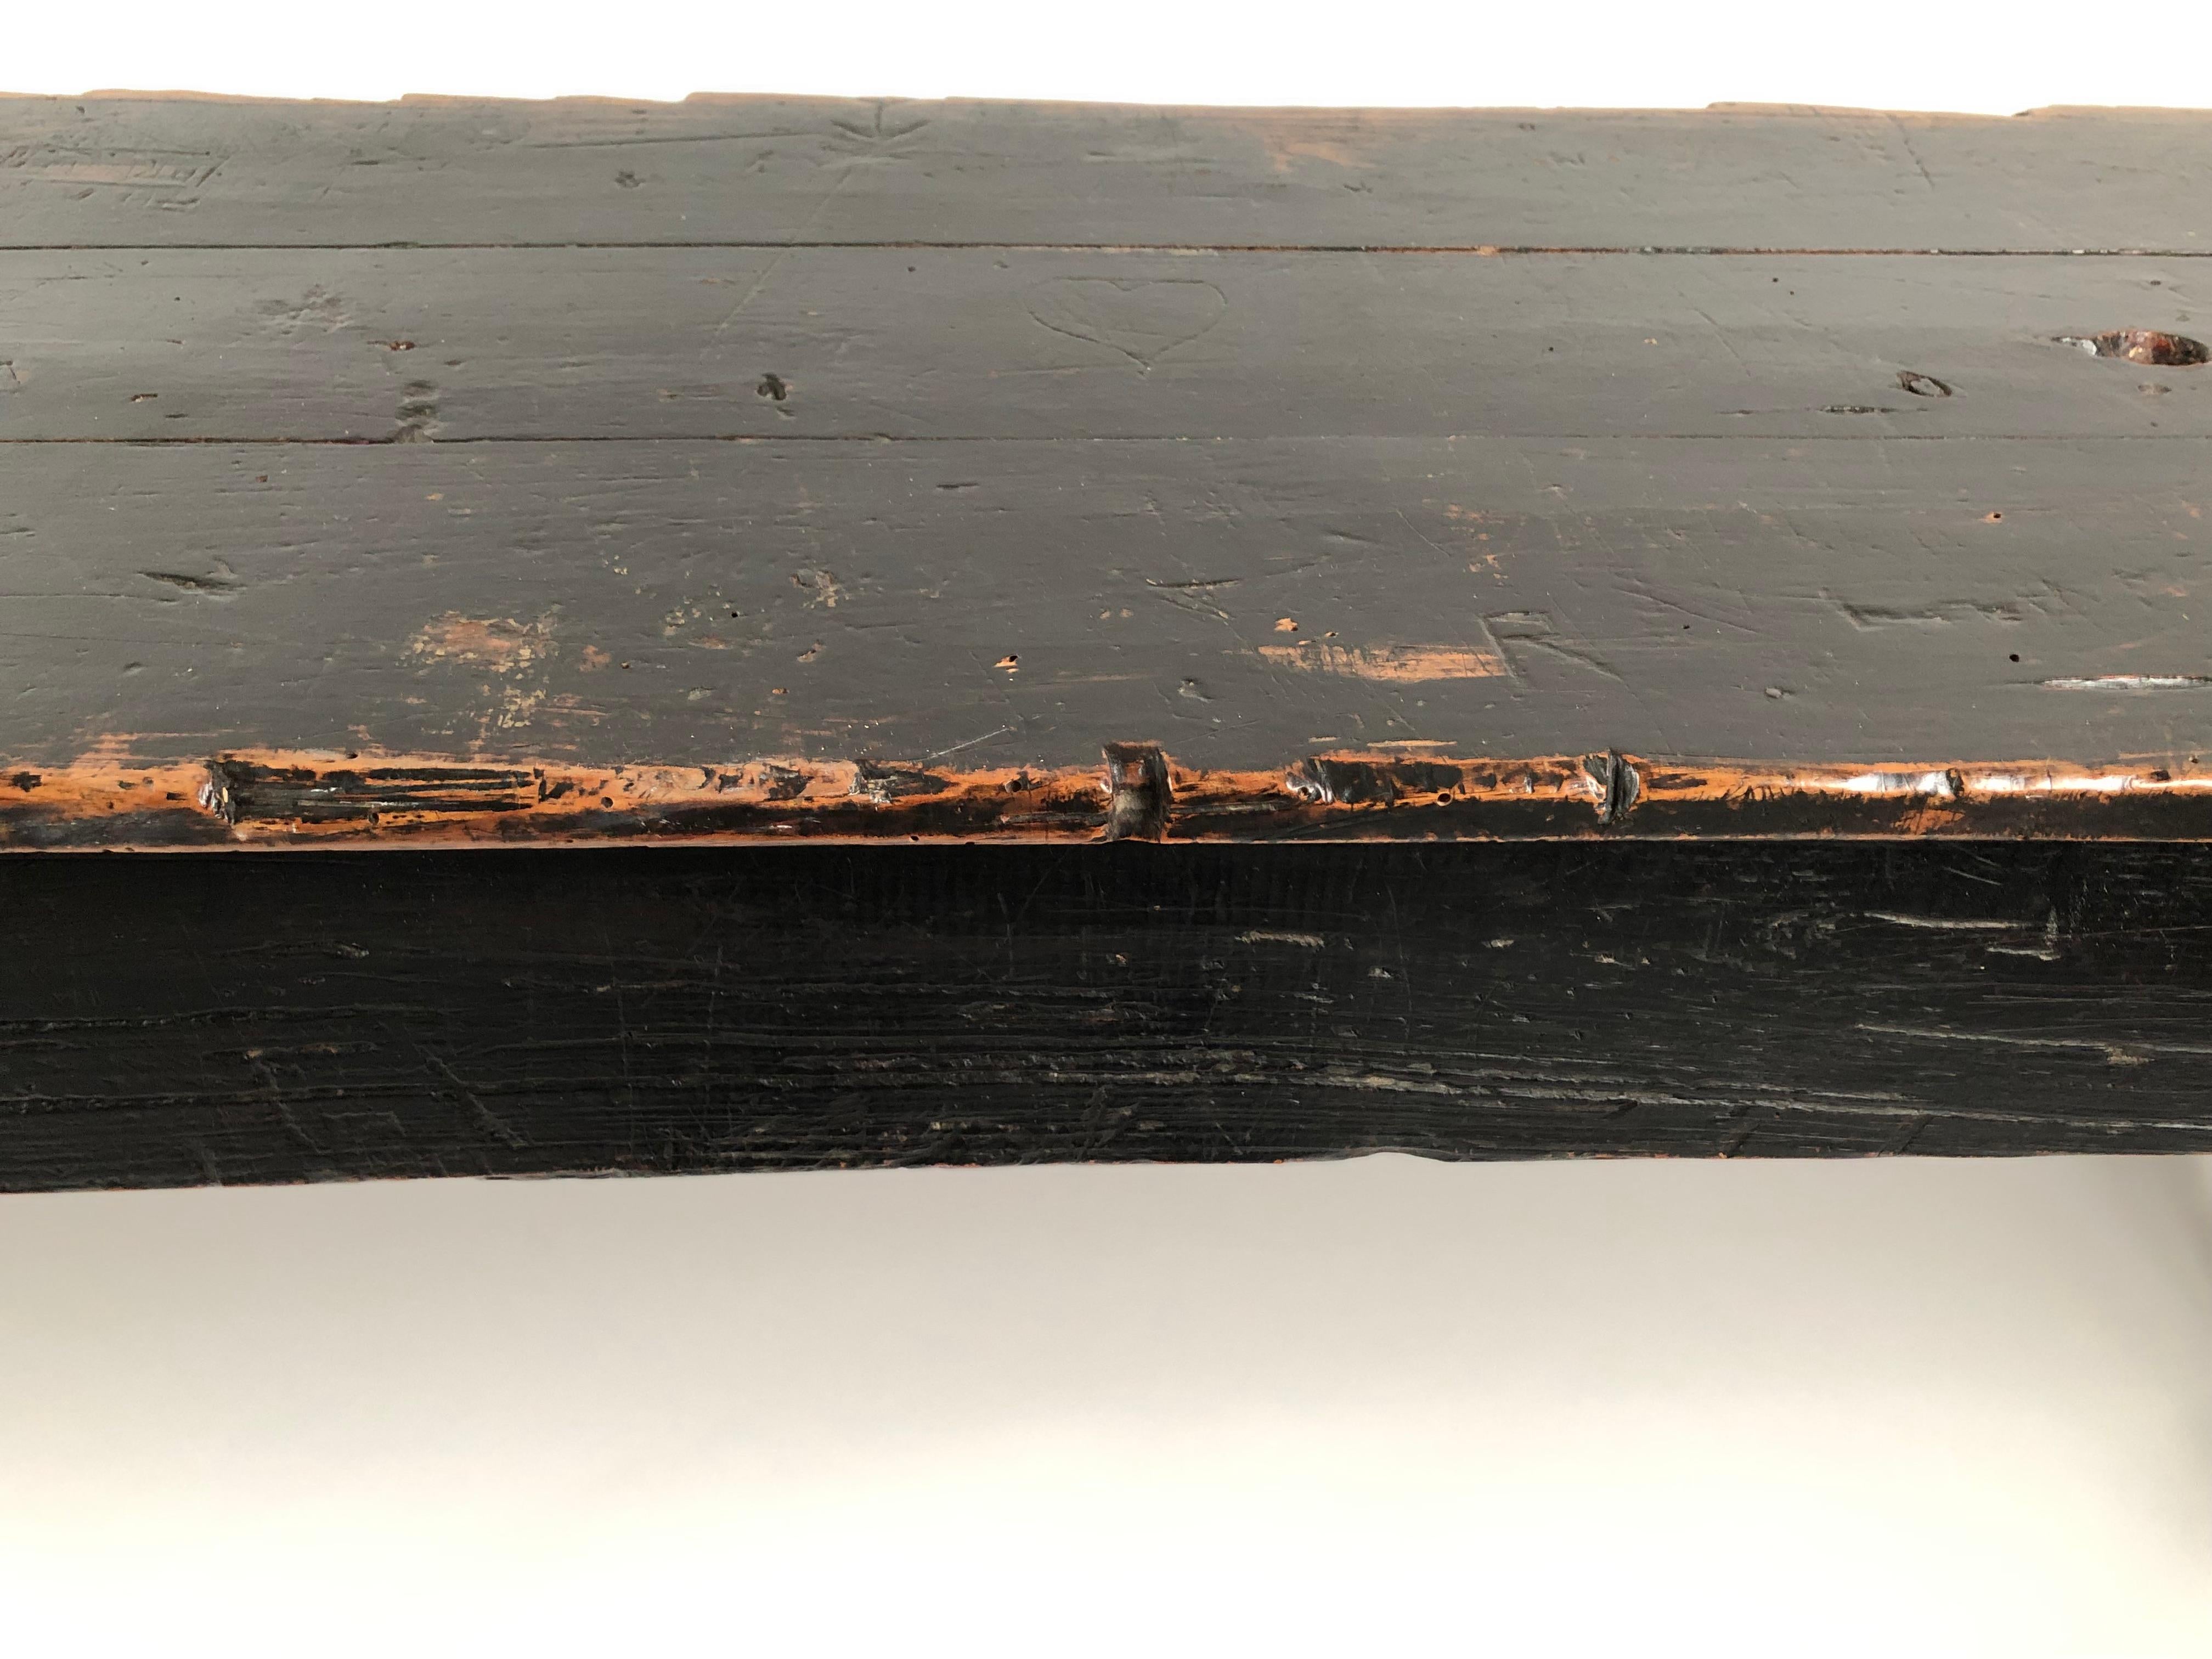 An unusually long narrow country console table in old, weathered black paint, the rectangular top carved with graffiti, over four square section legs joined by cross stretchers on each end. This table would work very well as a sofa table, serving